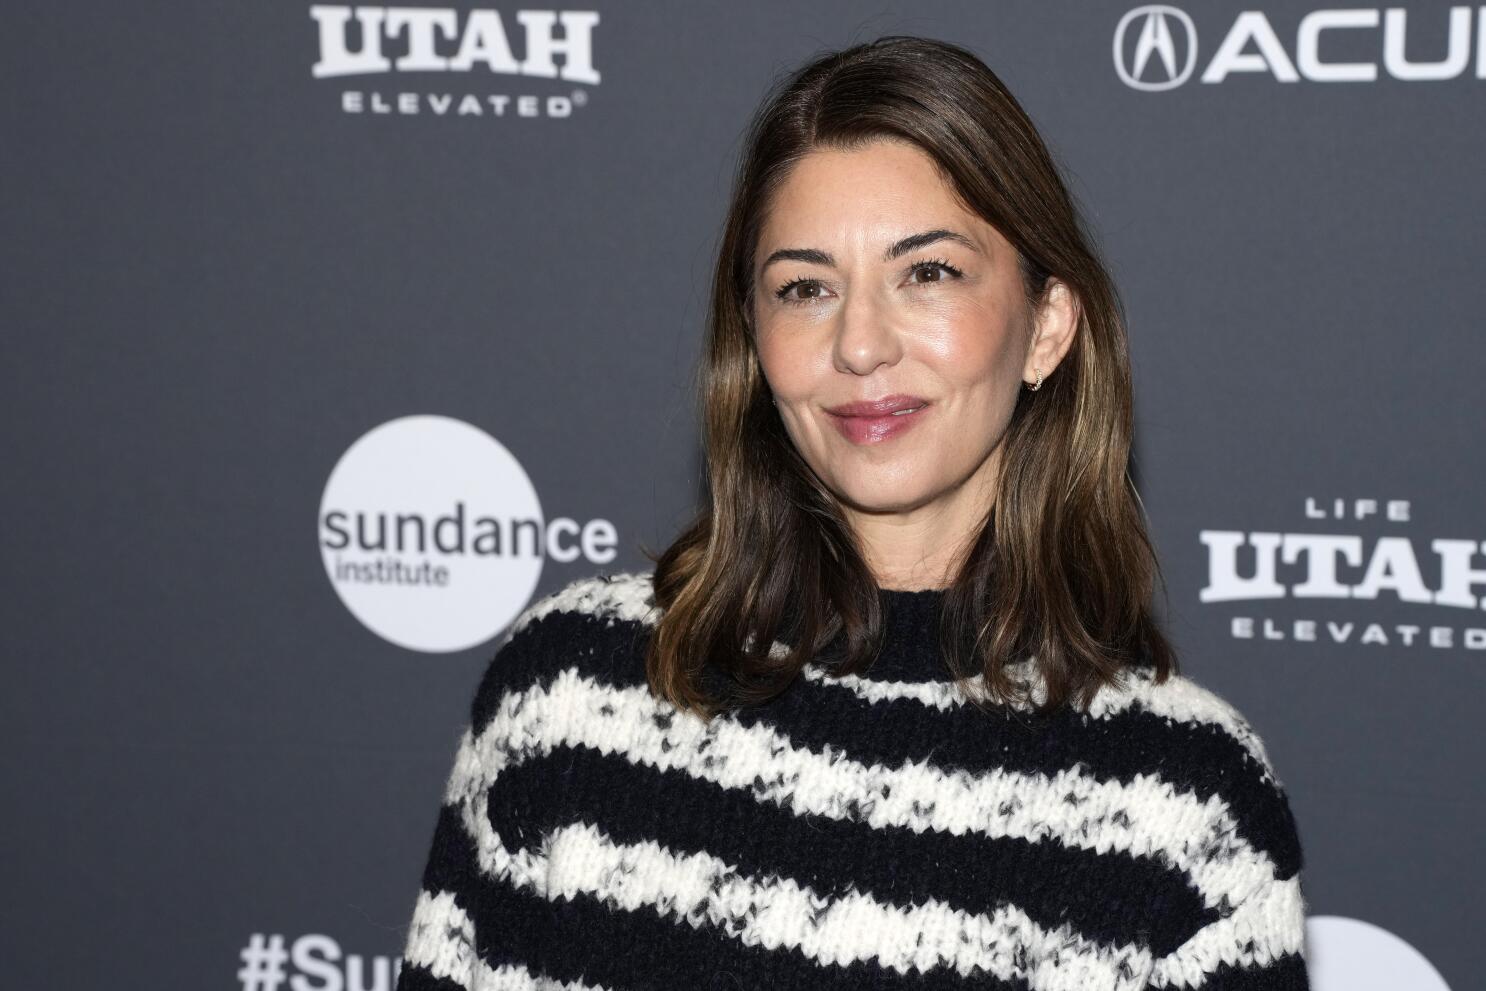 Sofia Coppola's daughter hailed as a 'filmmaking genius' for her